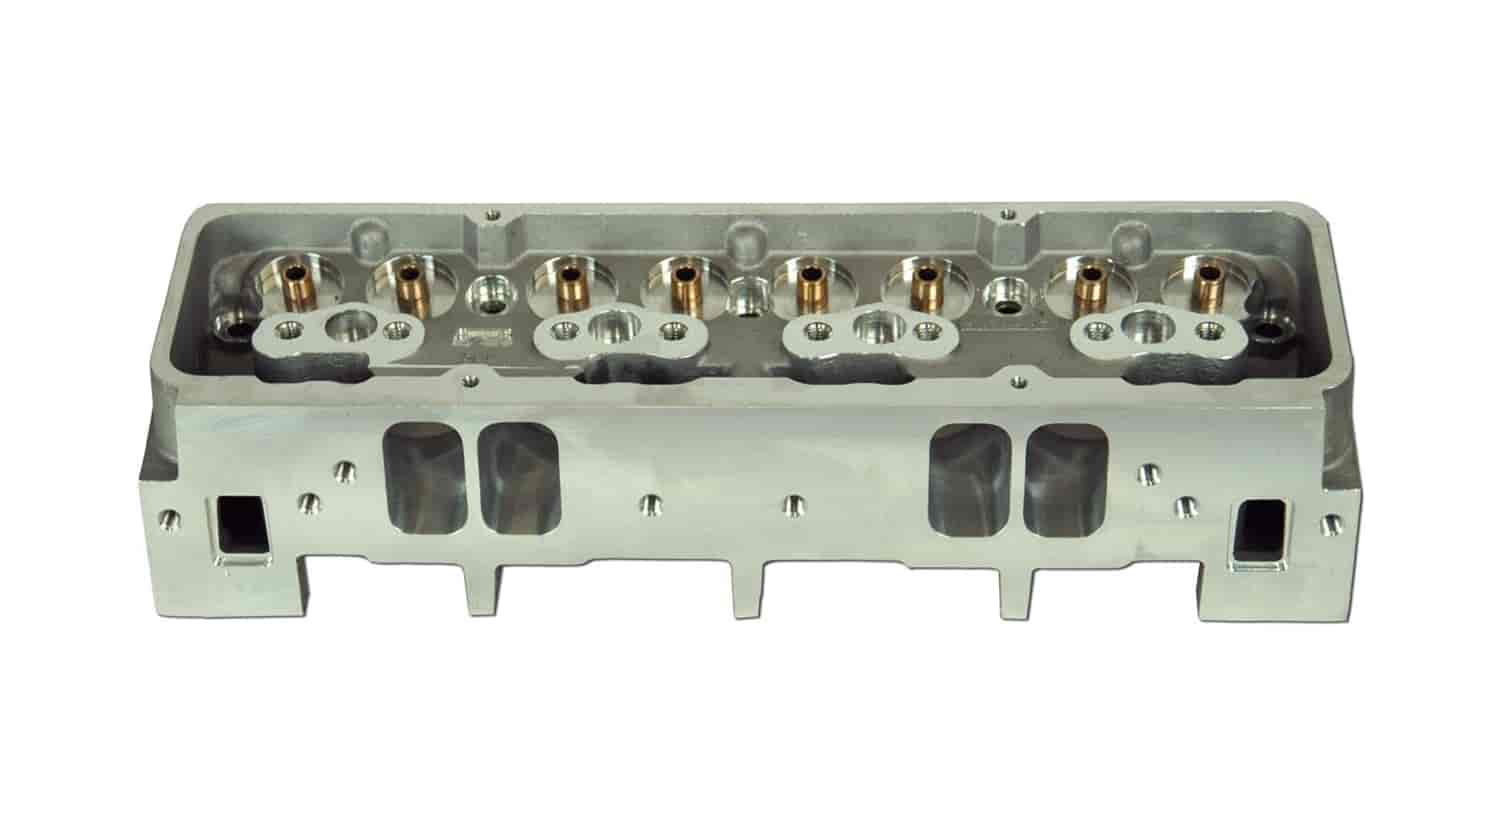 12.5 Degree Race Series Small Block Chevy 296 Cylinder Head